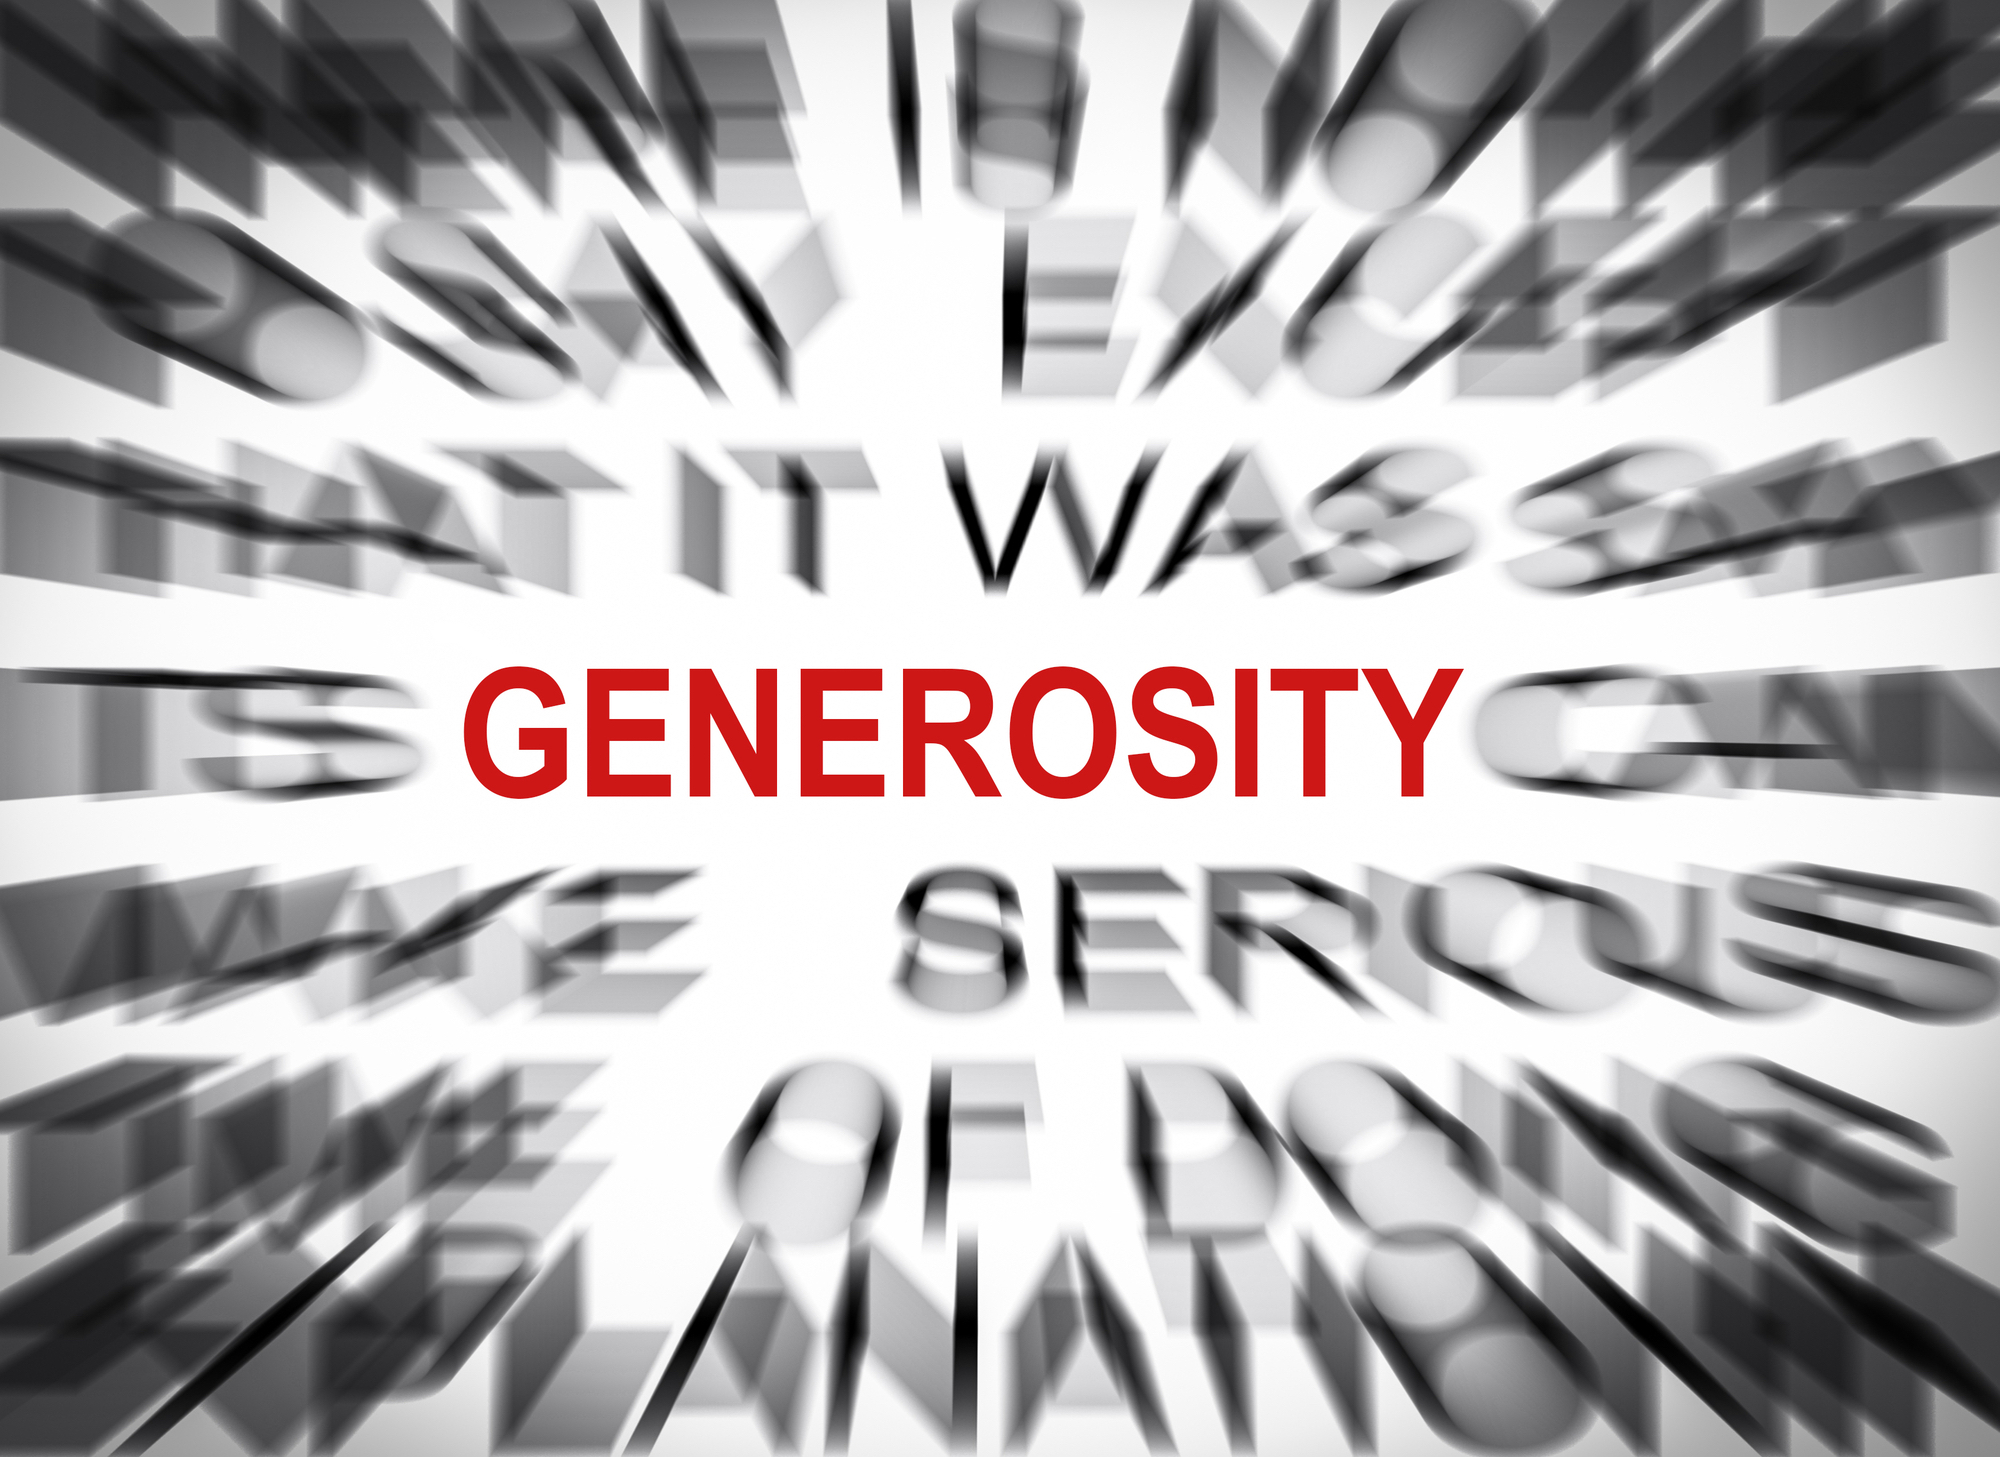 Blured text with focus on GENEROSITY